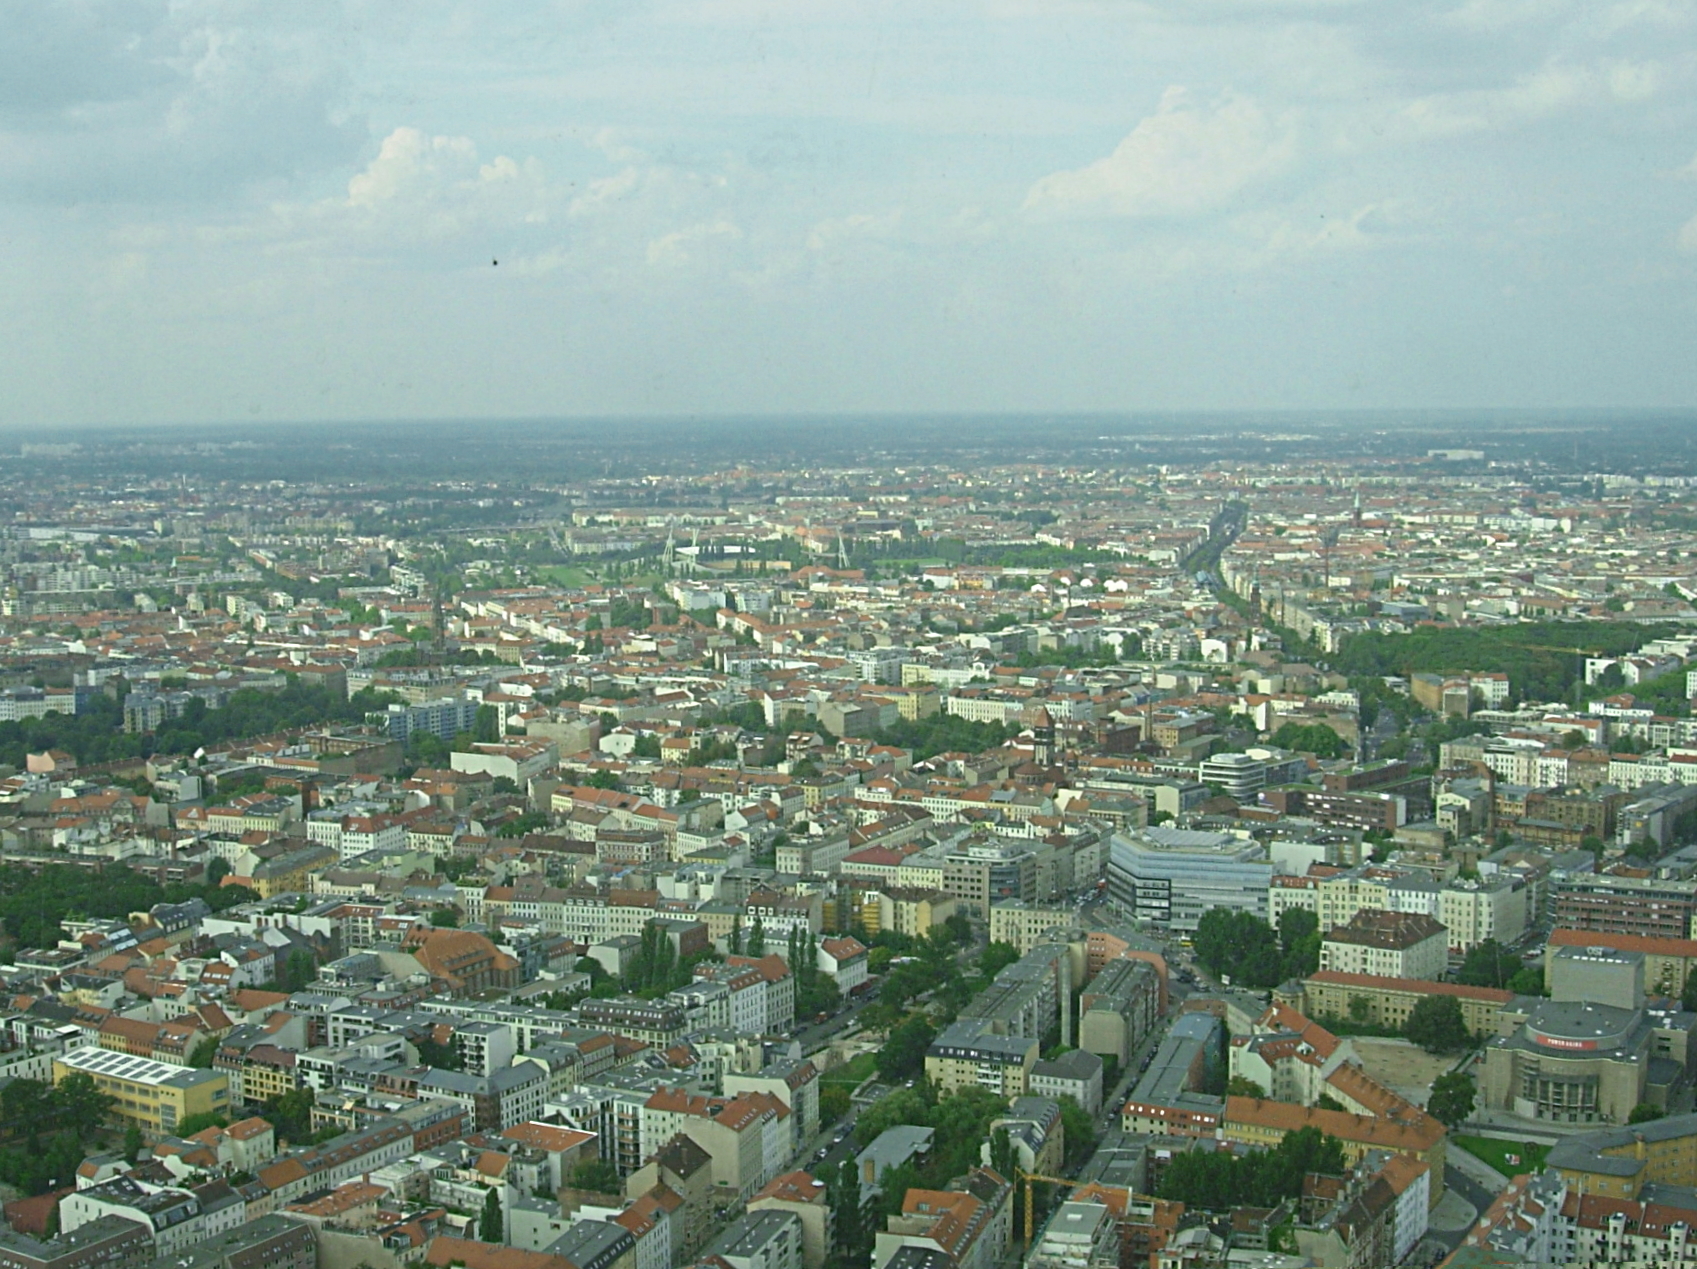 this is a large view from a high tower in the city